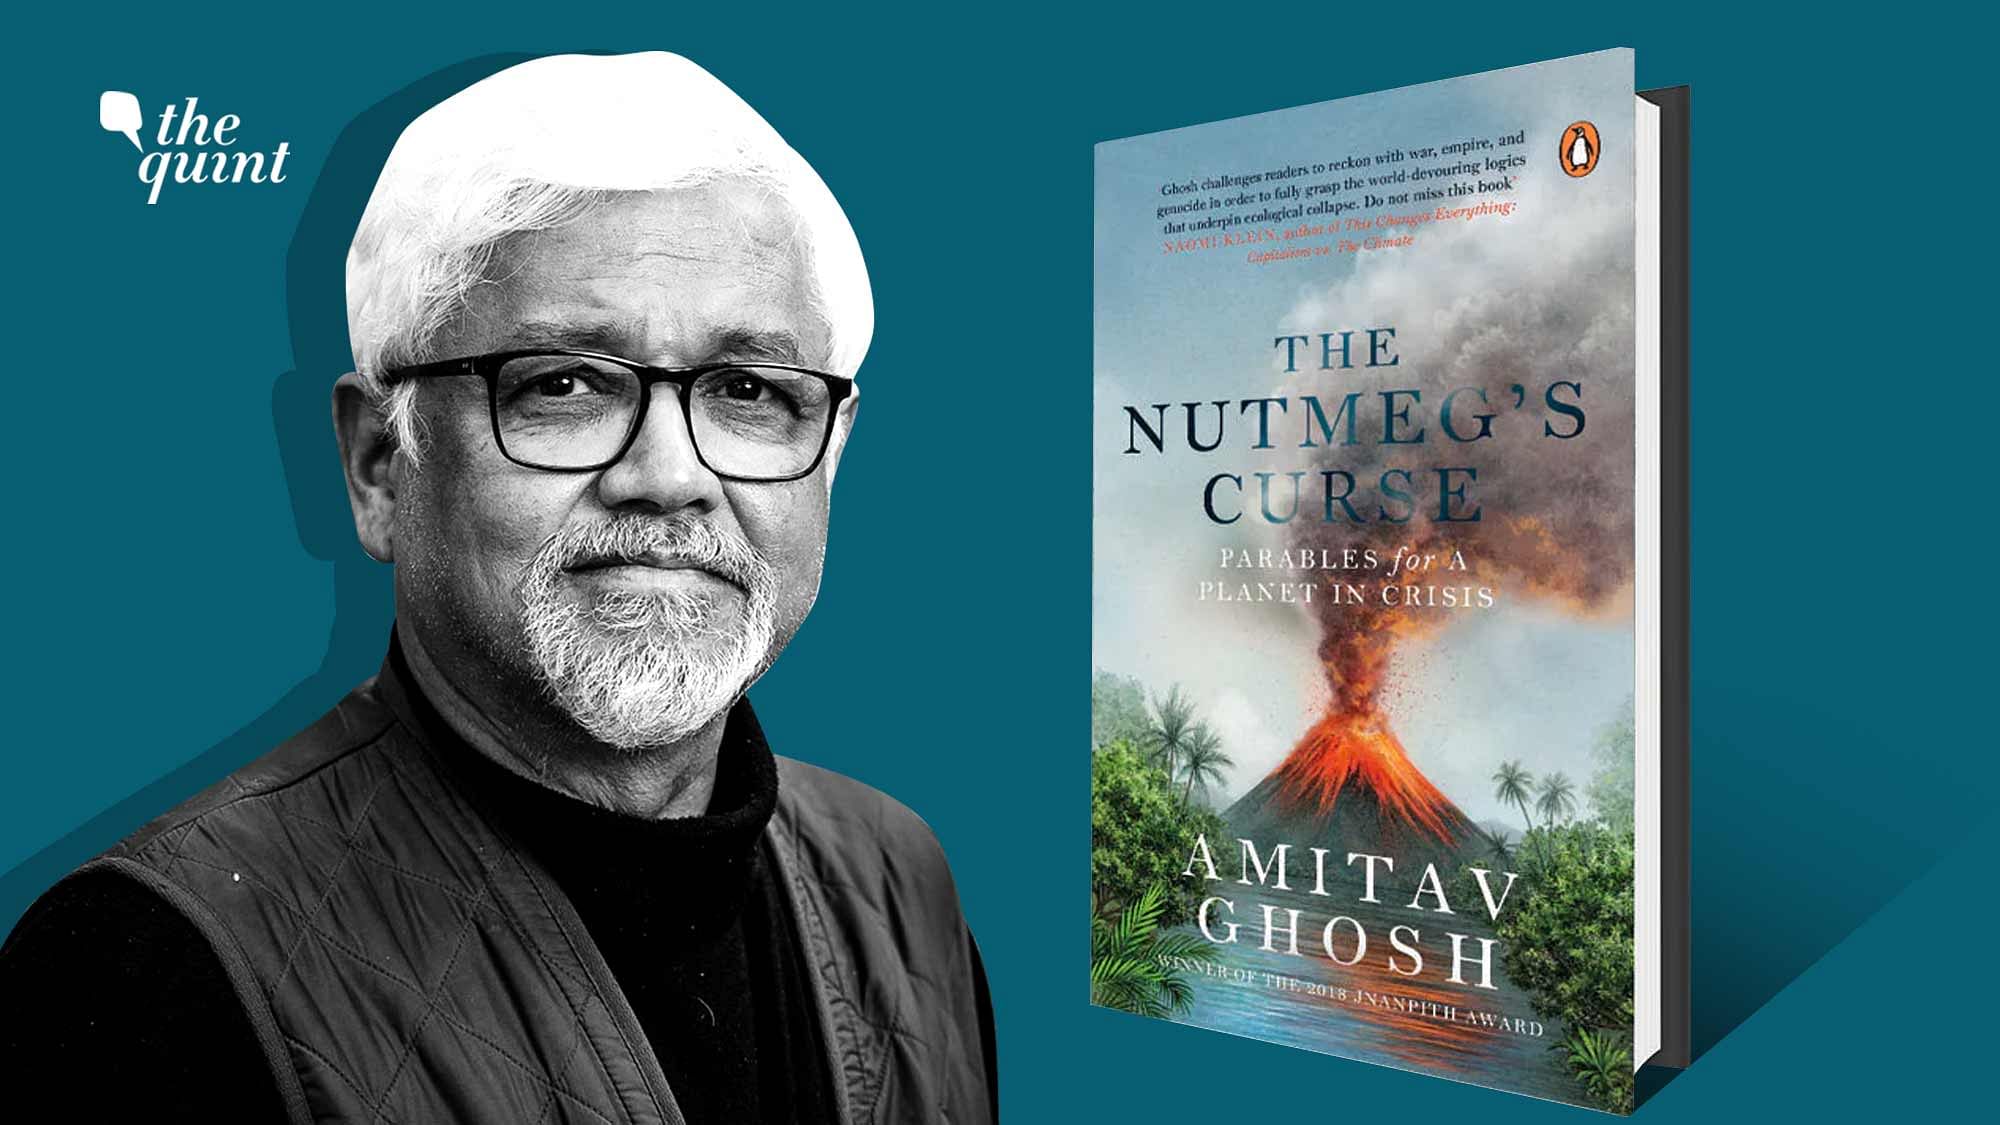 <div class="paragraphs"><p>Indian writer Amitav Ghosh’s new book <em>The Nutmeg’s Curse: Parables for a Planet in Crisis</em> argues that the origins of our current climate crisis are rooted in the exploitative practices of western colonialism.</p></div>